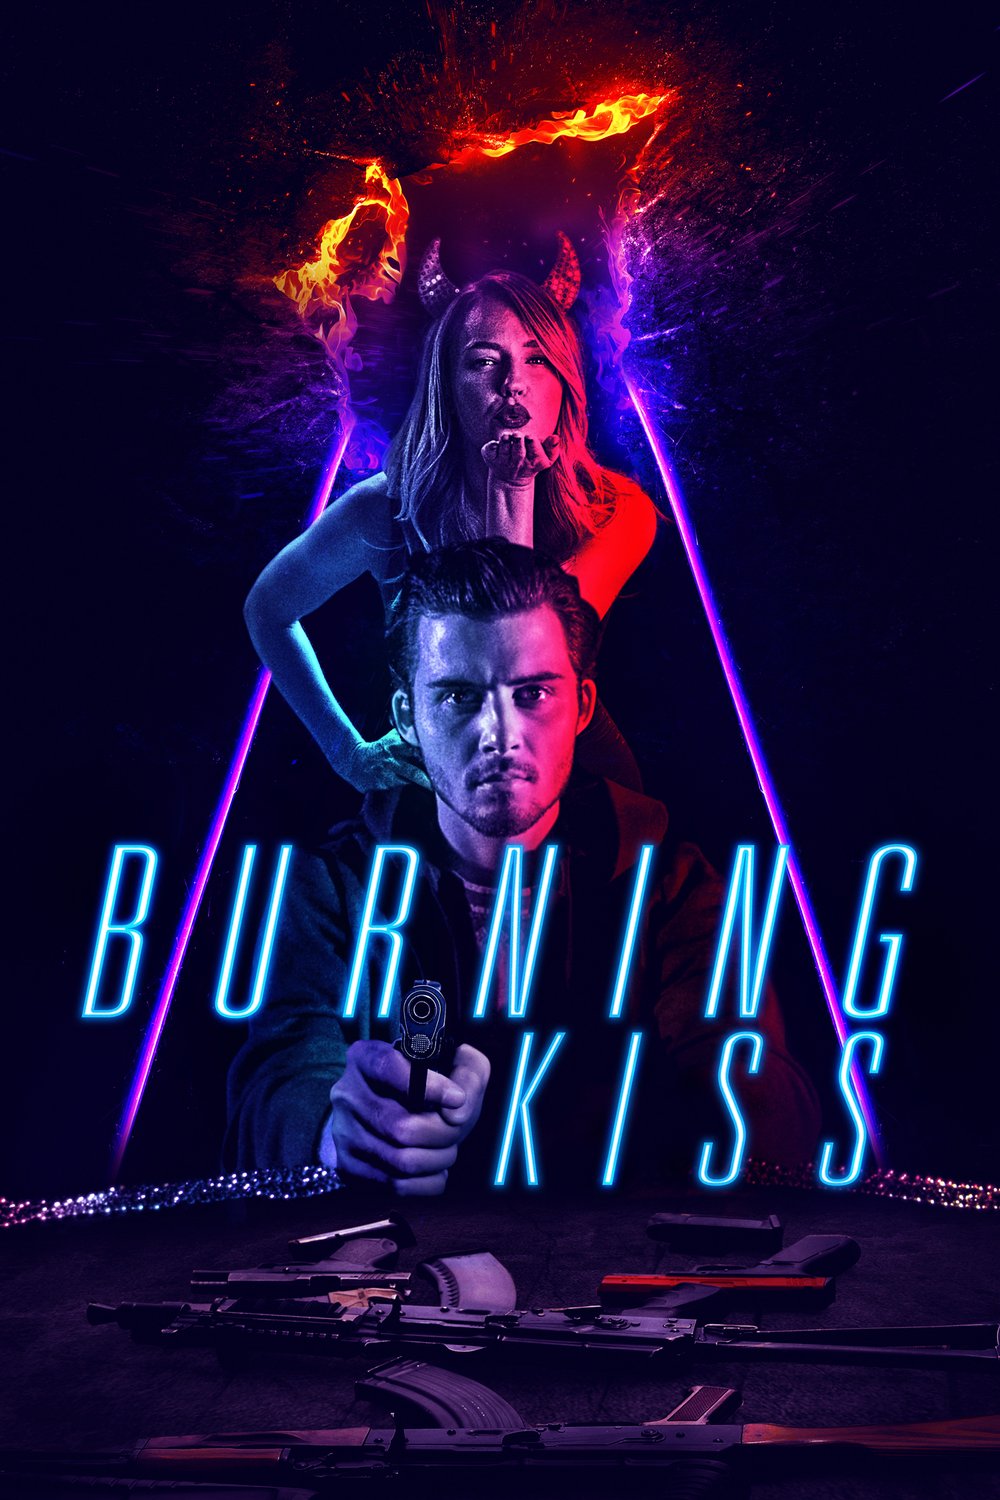 Poster of the movie Burning Kiss